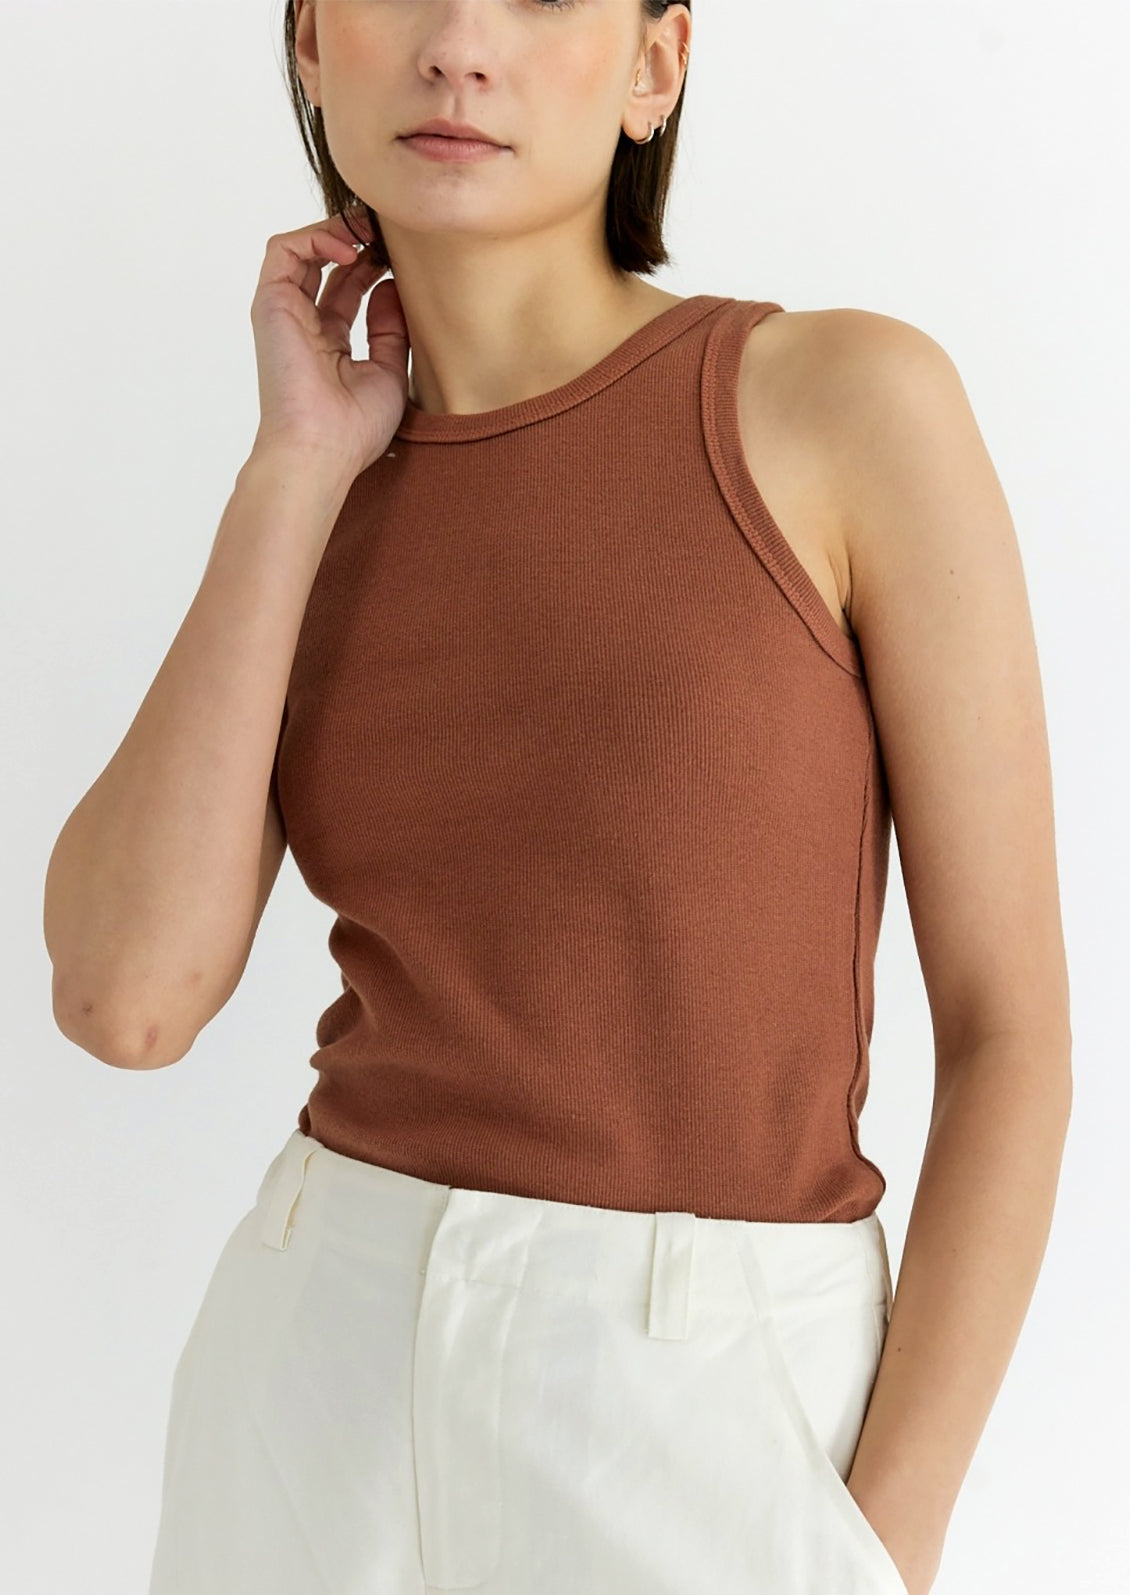 A woman wearing a rust colored ribbed tank top.